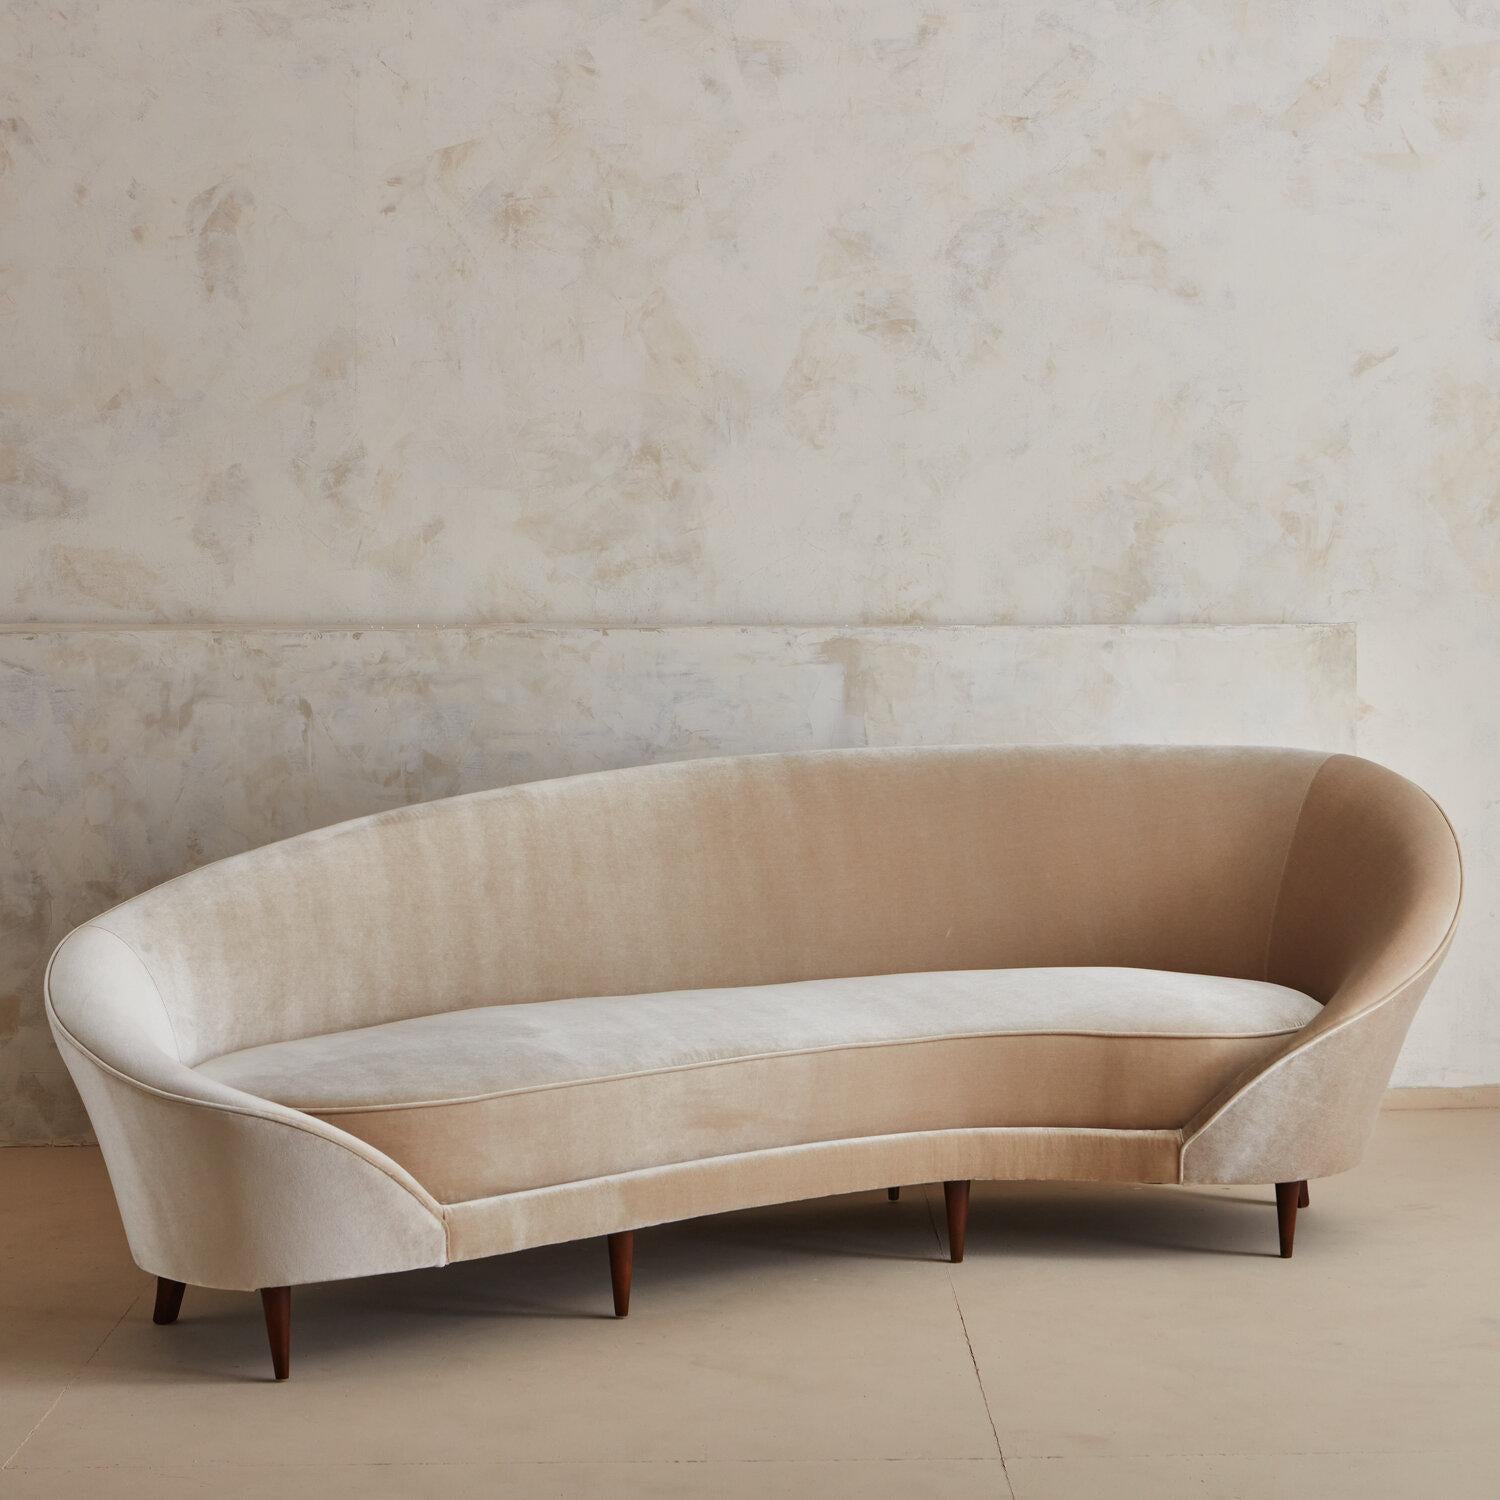 An elegant mid century Italian sofa sourced in Northern Italy. Upon arrival to us in Chicago, our team fully restored this piece including new foam and a beautiful champagne hued velvet.